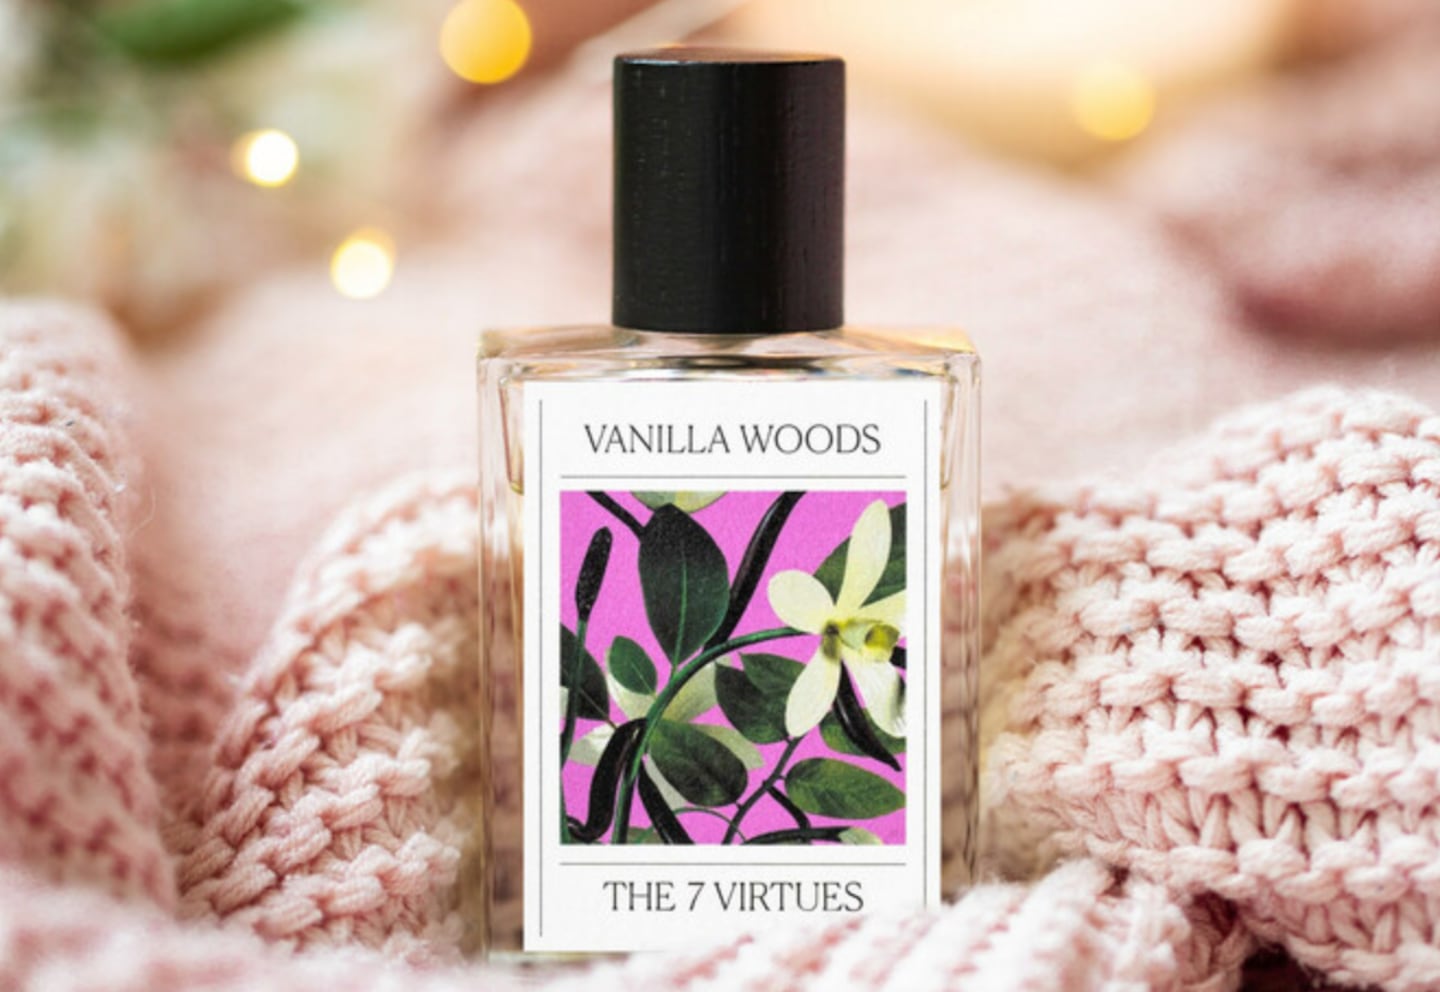 A bottle of perfume next to a pink knitted blanket.